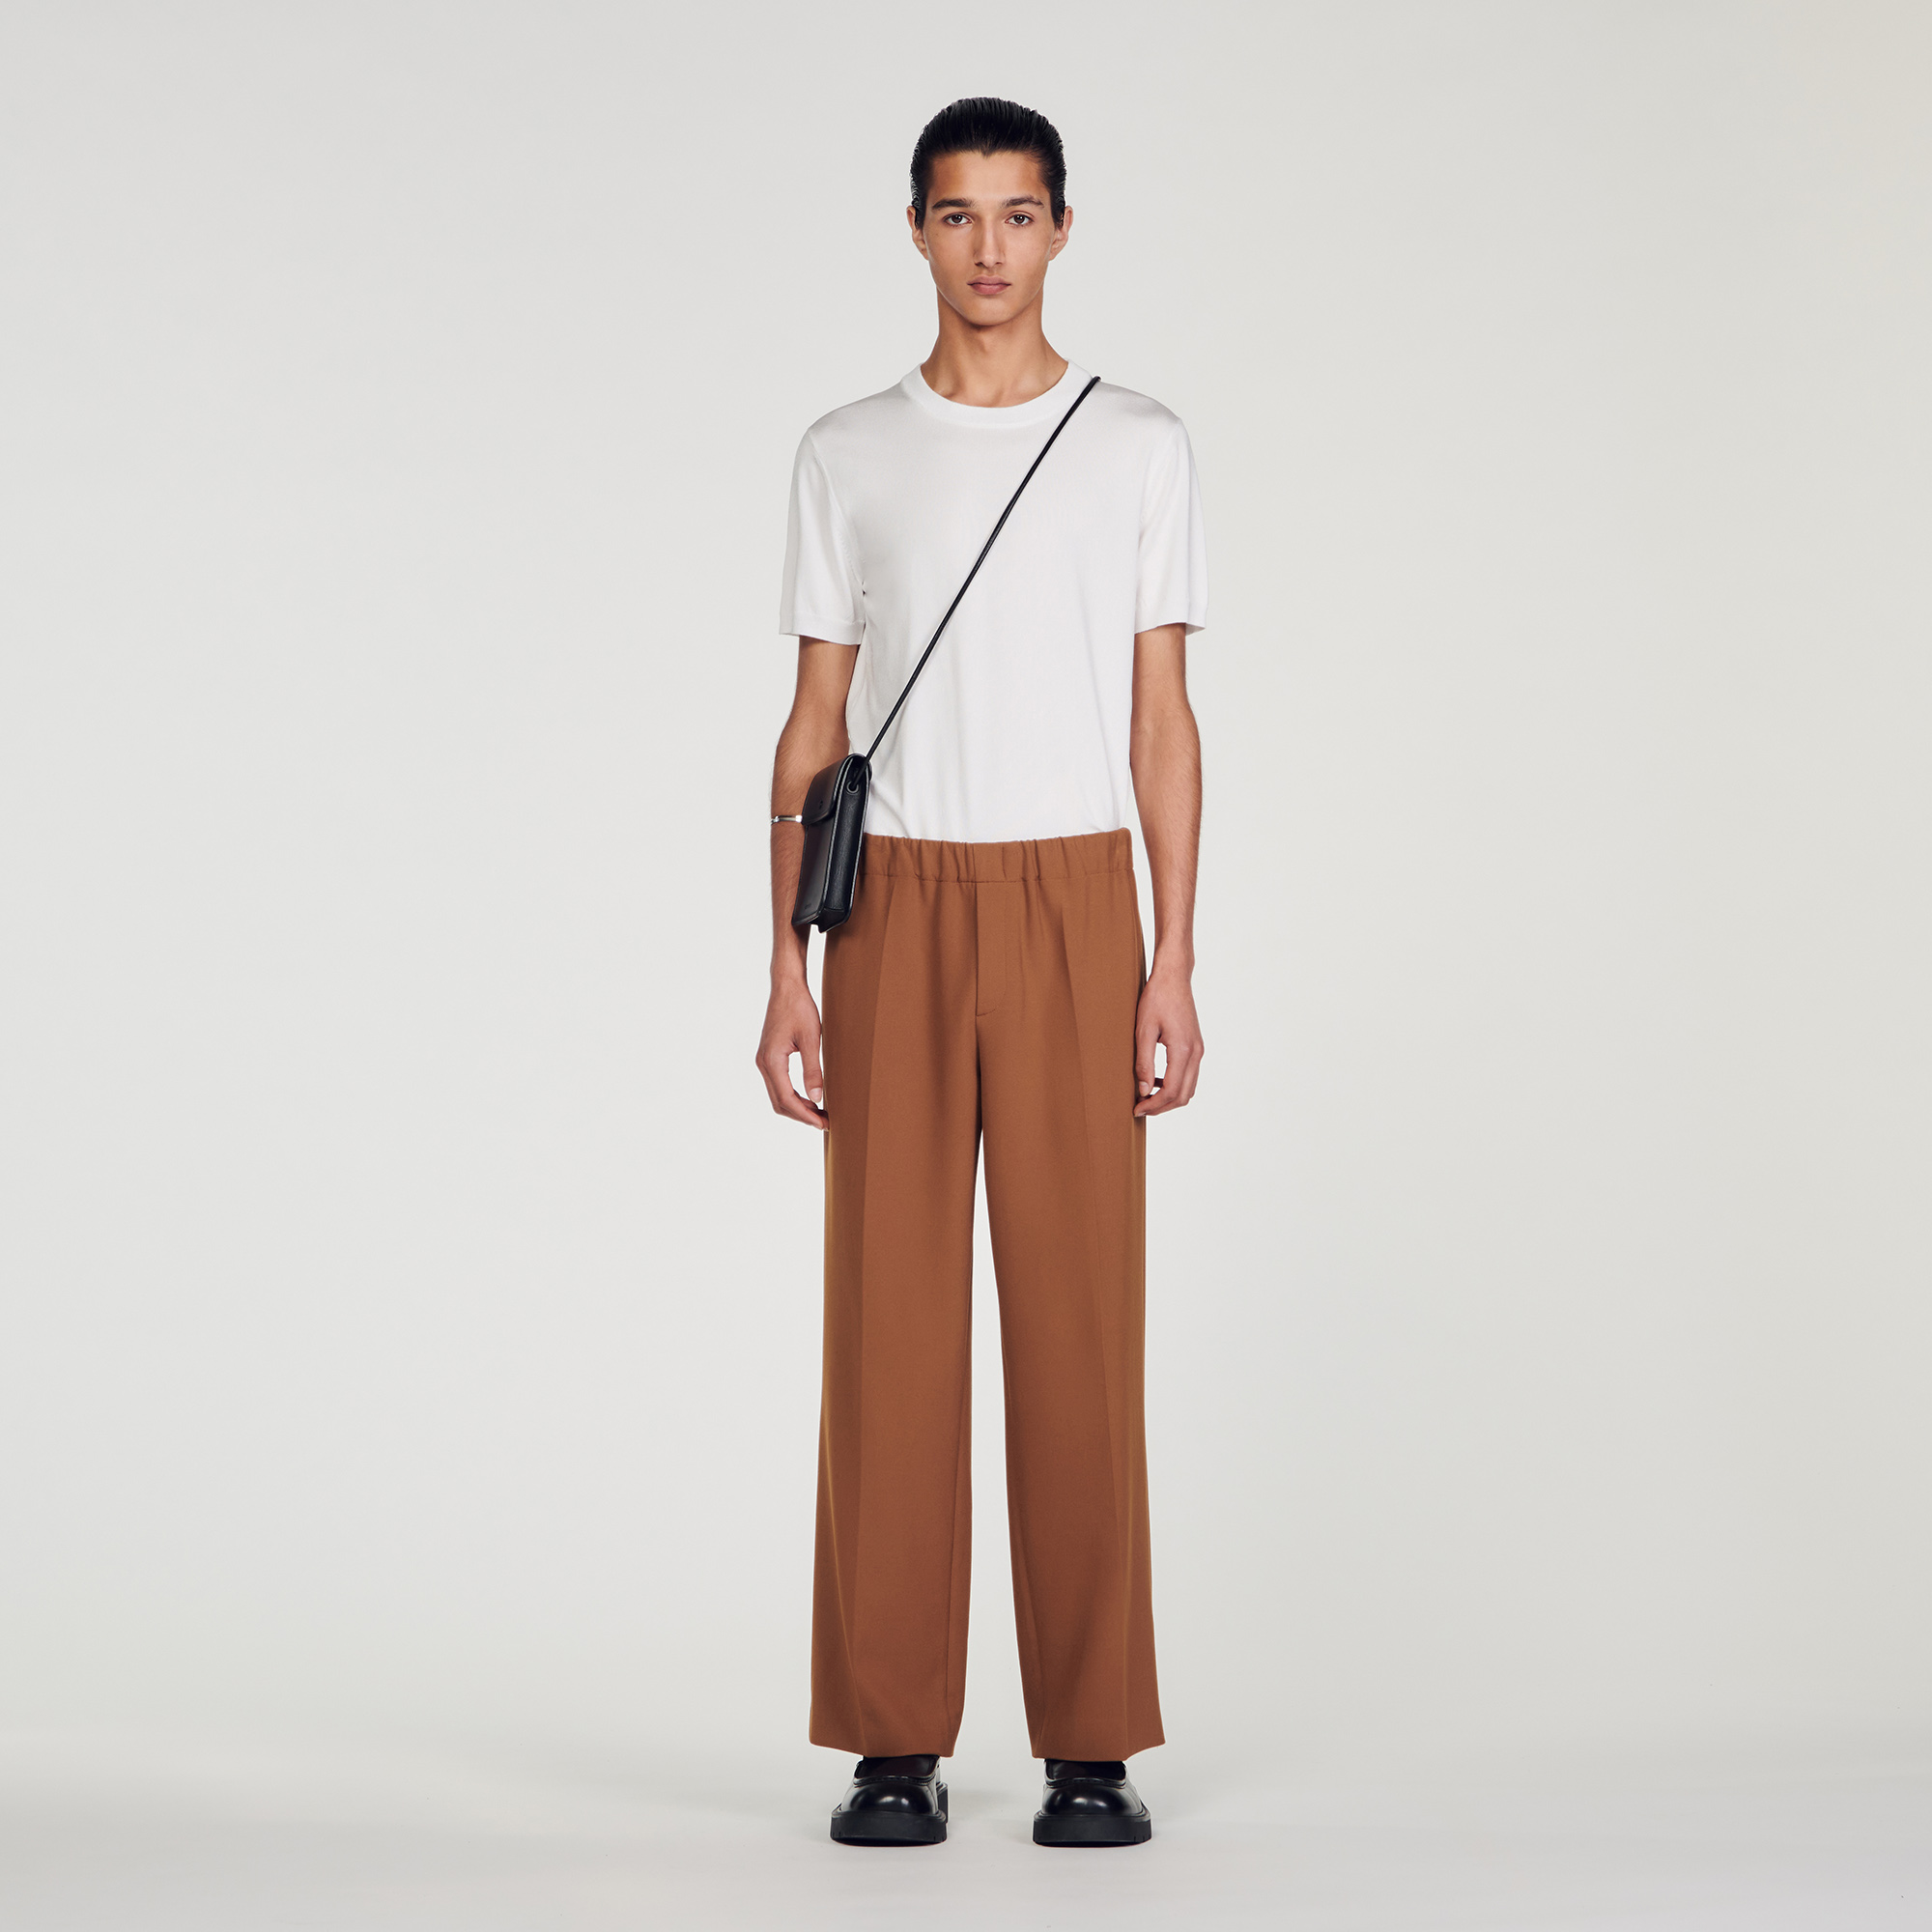 Sandro polyester Wide-leg jersey pants with an elasticated waist and pockets on the sides